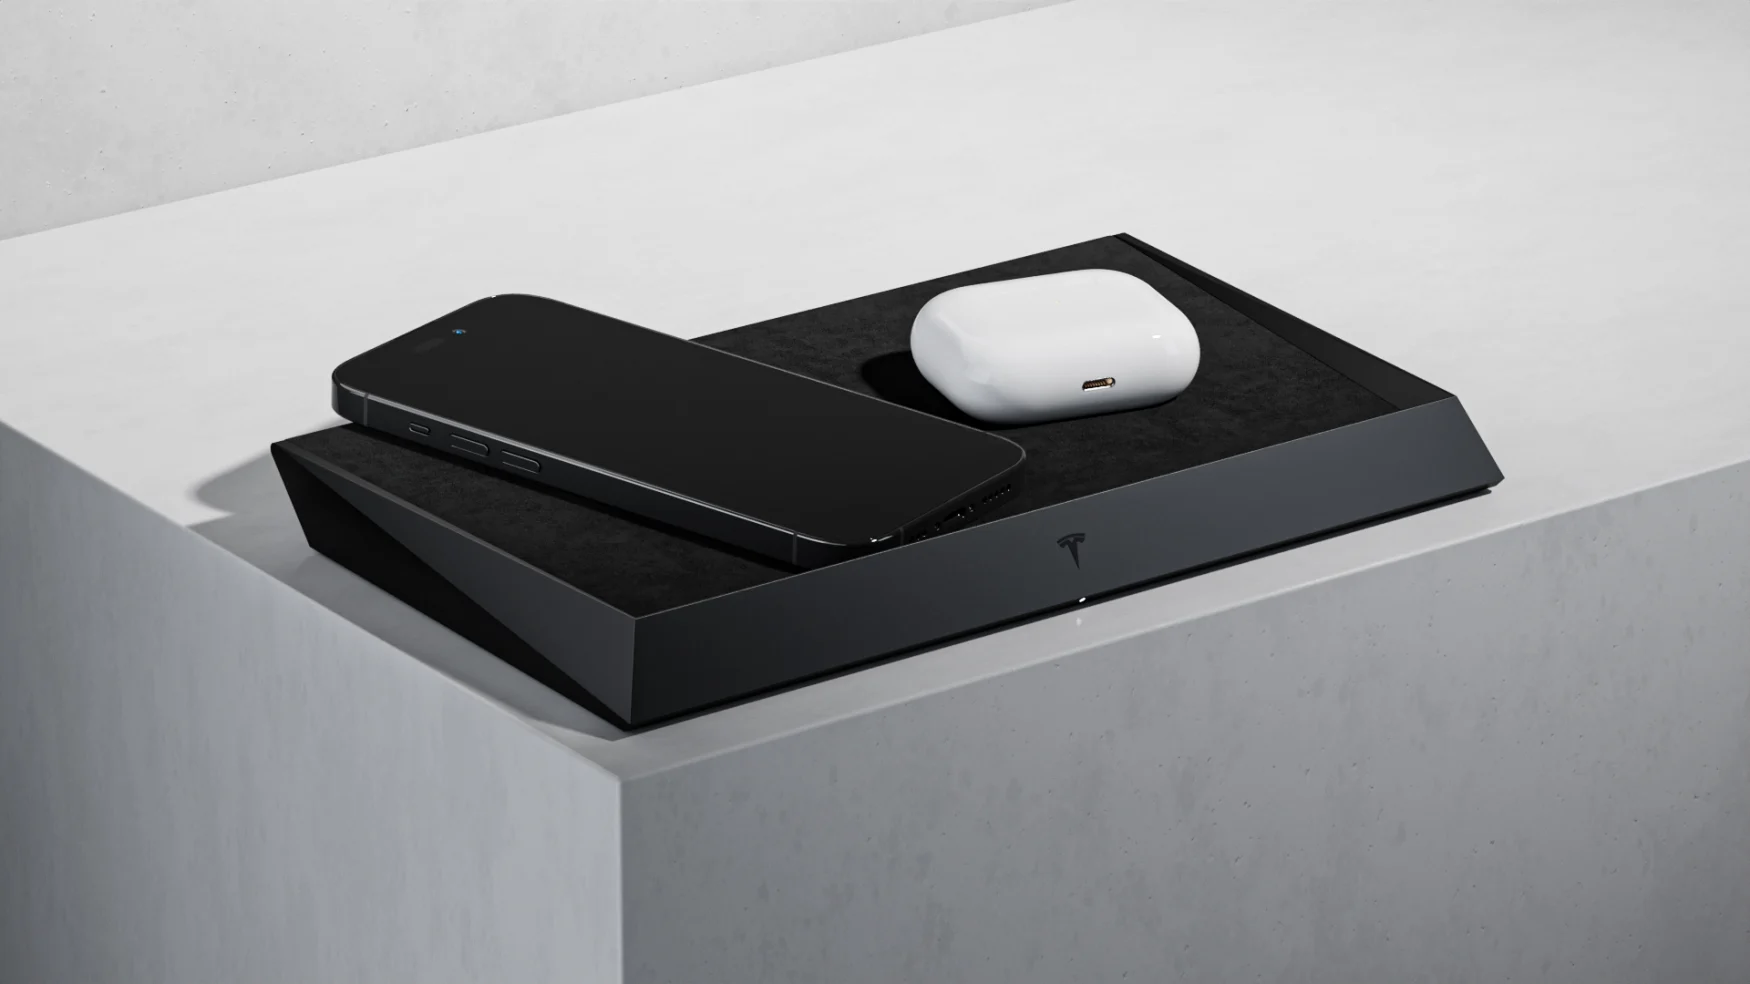 The Tesla Wireless Charging Platform with an iPhone and AirPods on it, sitting on an even stone surface.